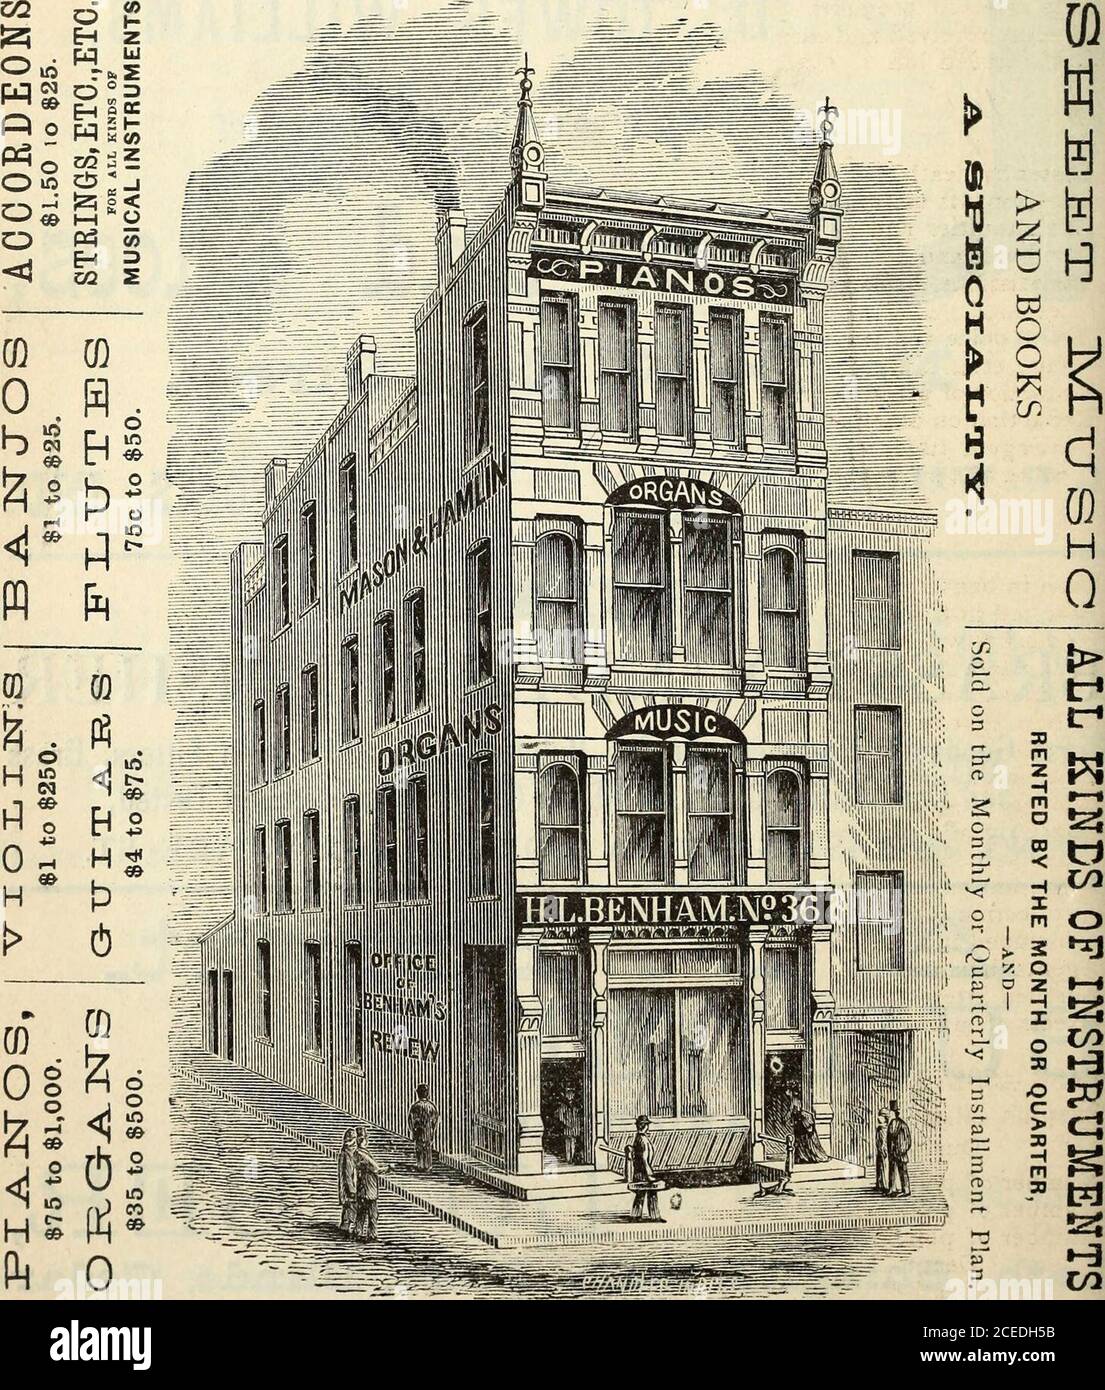 . Polk's Indianapolis (Marion County, Ind.) city directory, 1878. BUILDER, AND DEALER IN LUMBER, Lath, Shingles, Sash., Doors, Blinds, CedarPosts, Plate Glass, Etc., I 94 and 96 FORT WAYNE AVE., INDIANAPOLIS, IND. 88 cMENBAMS-s MUSIC 1 PUBLISHING HOUSE 36 EAST WASHINGTON STREET, I1TDIA.ITafolis, iitd. N. BAND INSTRUMENTS, BRASS AND GERMAN SILVER AIiU STYX.ES. RFNHAWIQ RFVIFW THE BEST ADVERTISING MEDIUM, IJ Lai   Li t III O llL V I L f V As every cony contains valuable reading and $2 in Music$1.50 PER ANNUM. SINGLE NUMBERS, 15 CENTS. 89THIRTY-THIRD ANNUAL REPORT OF THE New-York Life Insuran Stock Photo